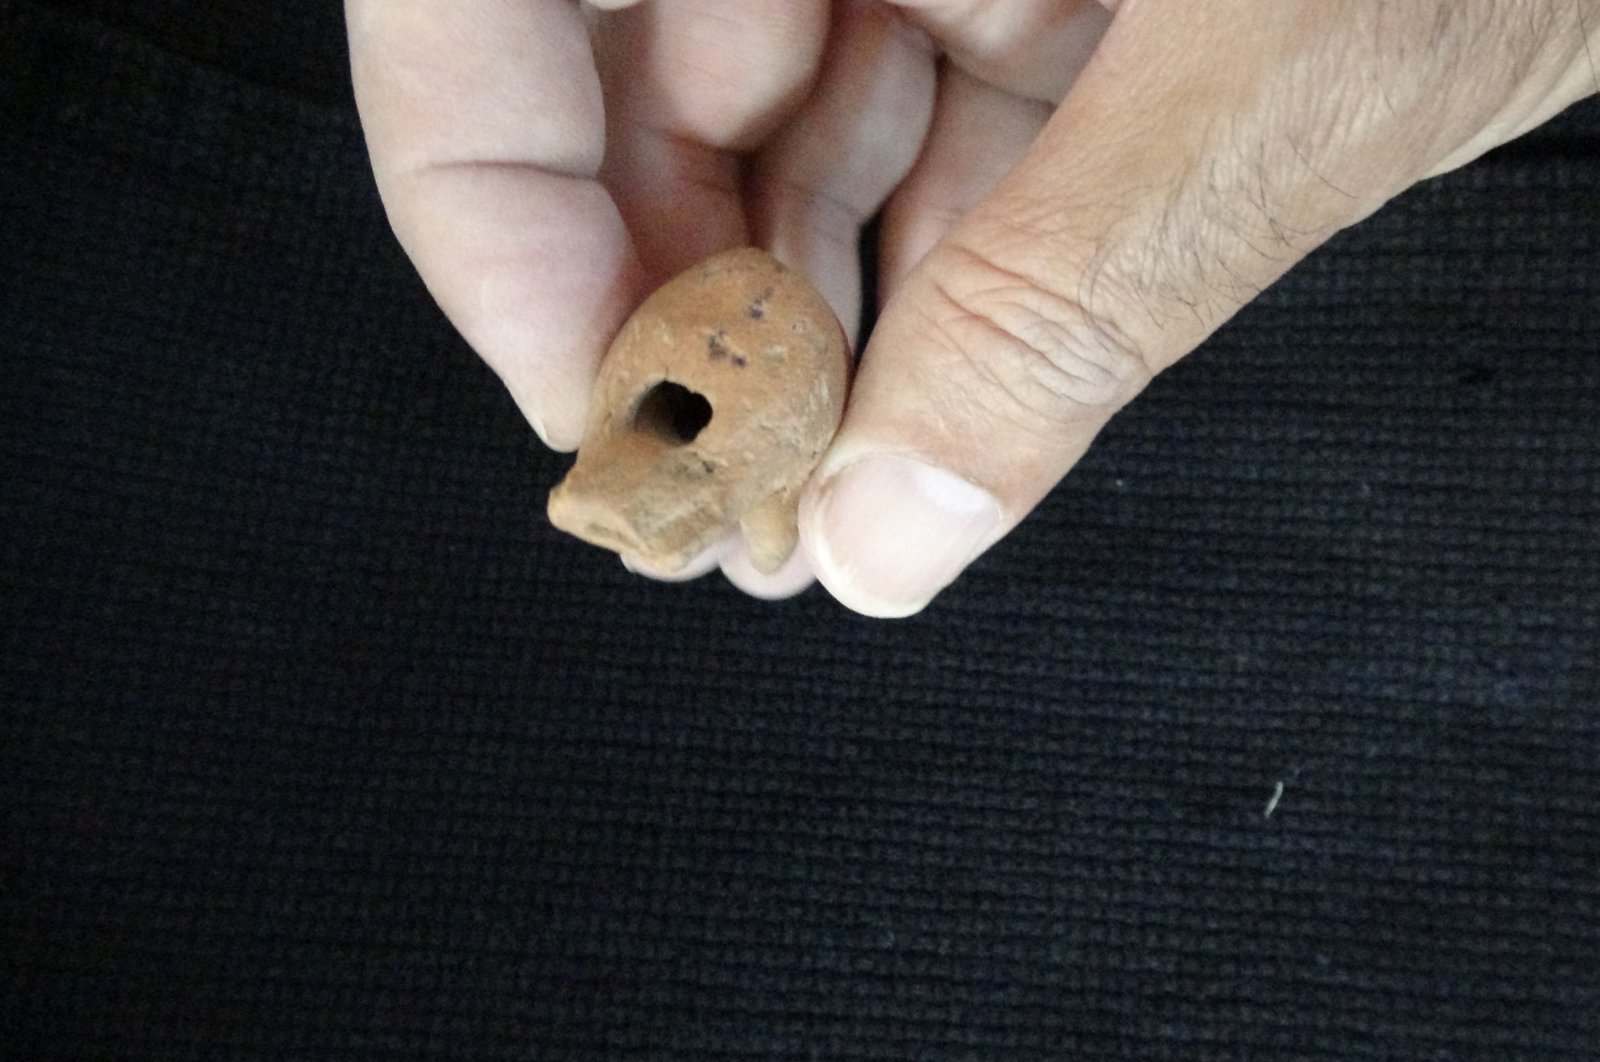 A 2,000-year-old whistle made of terracotta from the Roman period was found in a child&#039;s grave as a grave gift, Çanakkale, Türkiye, Oct. 18, 2022. (IHA Photo)